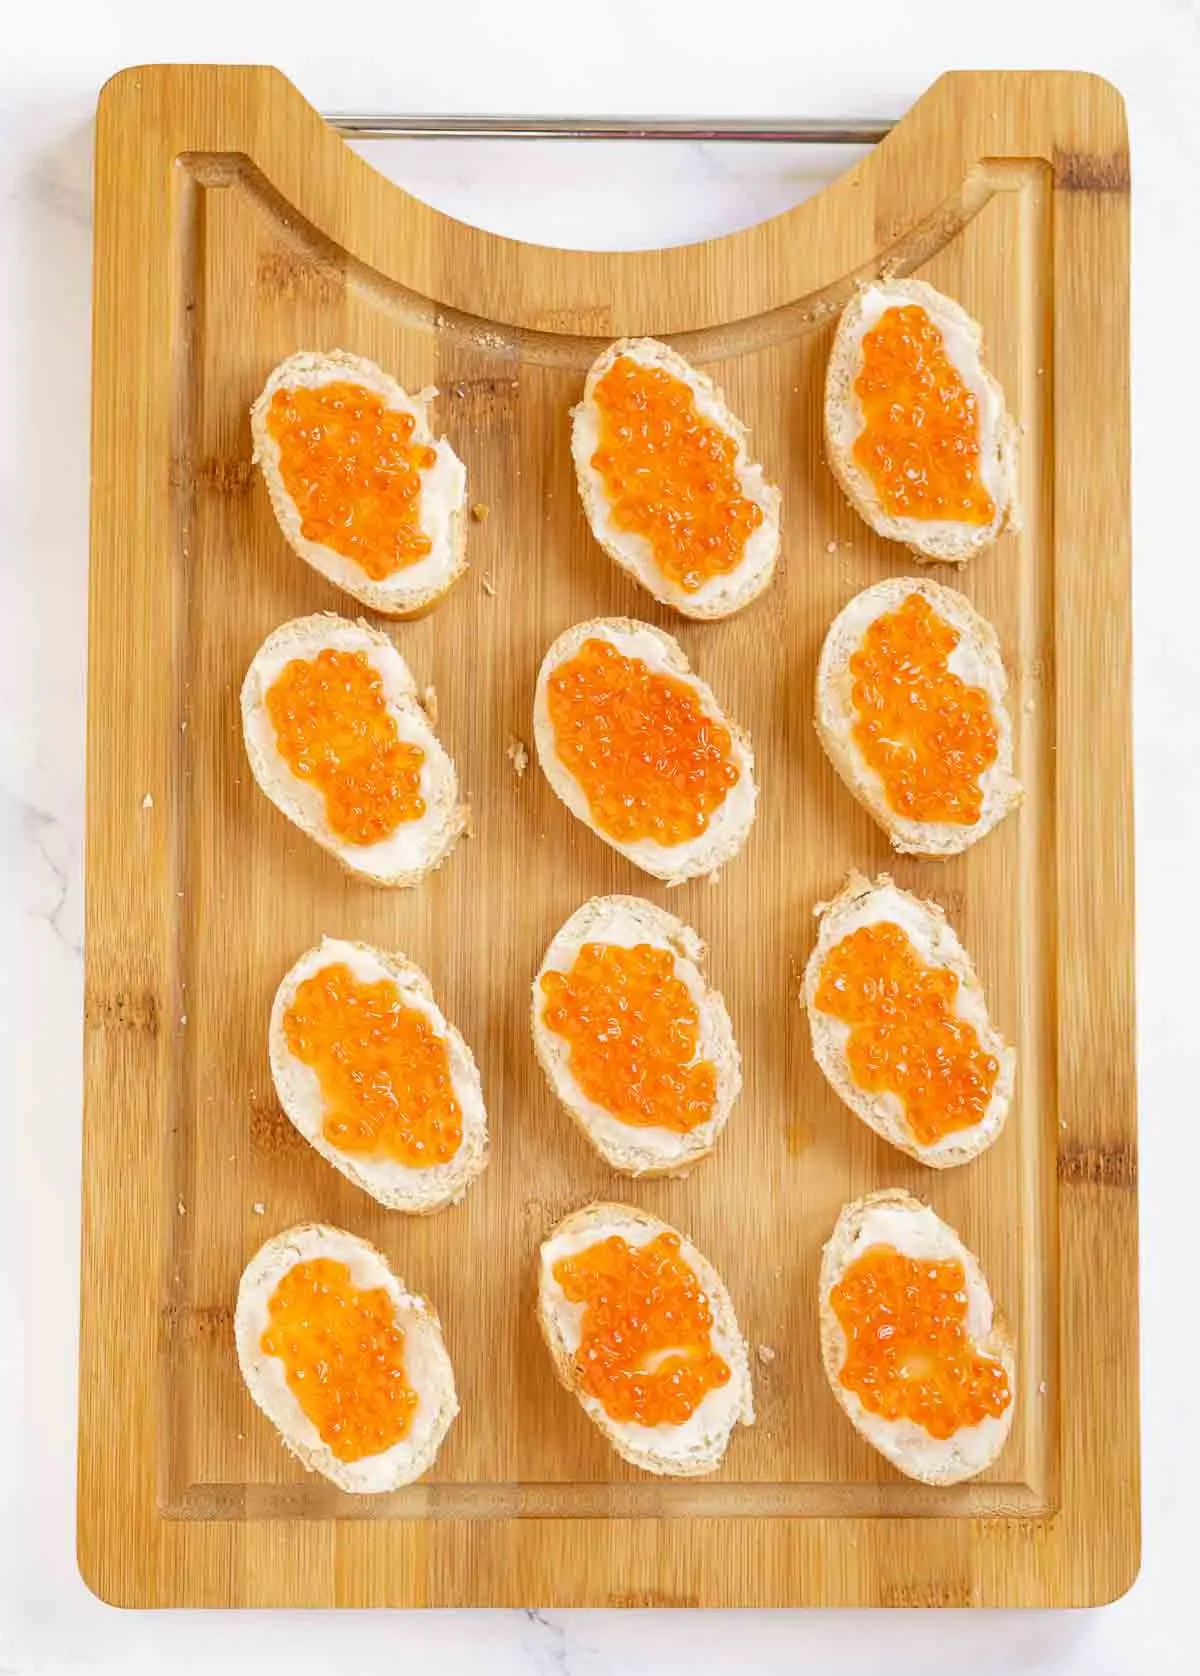 Baguette slices topped with butter and salmon roe